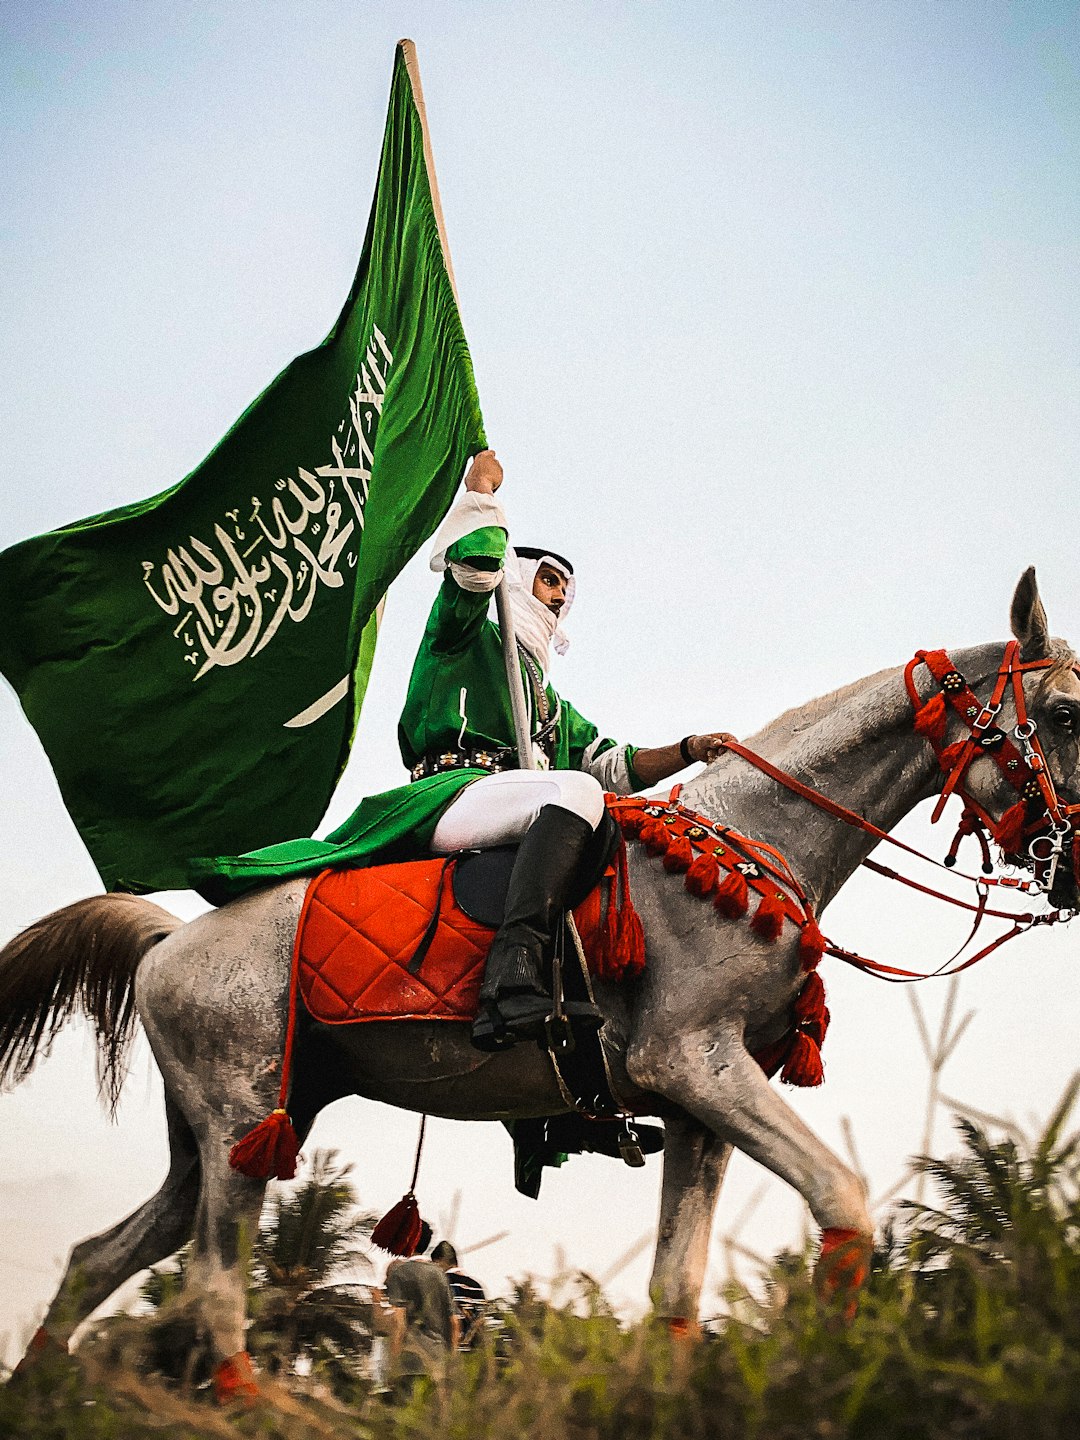 man in green and white shirt riding brown horse during daytime